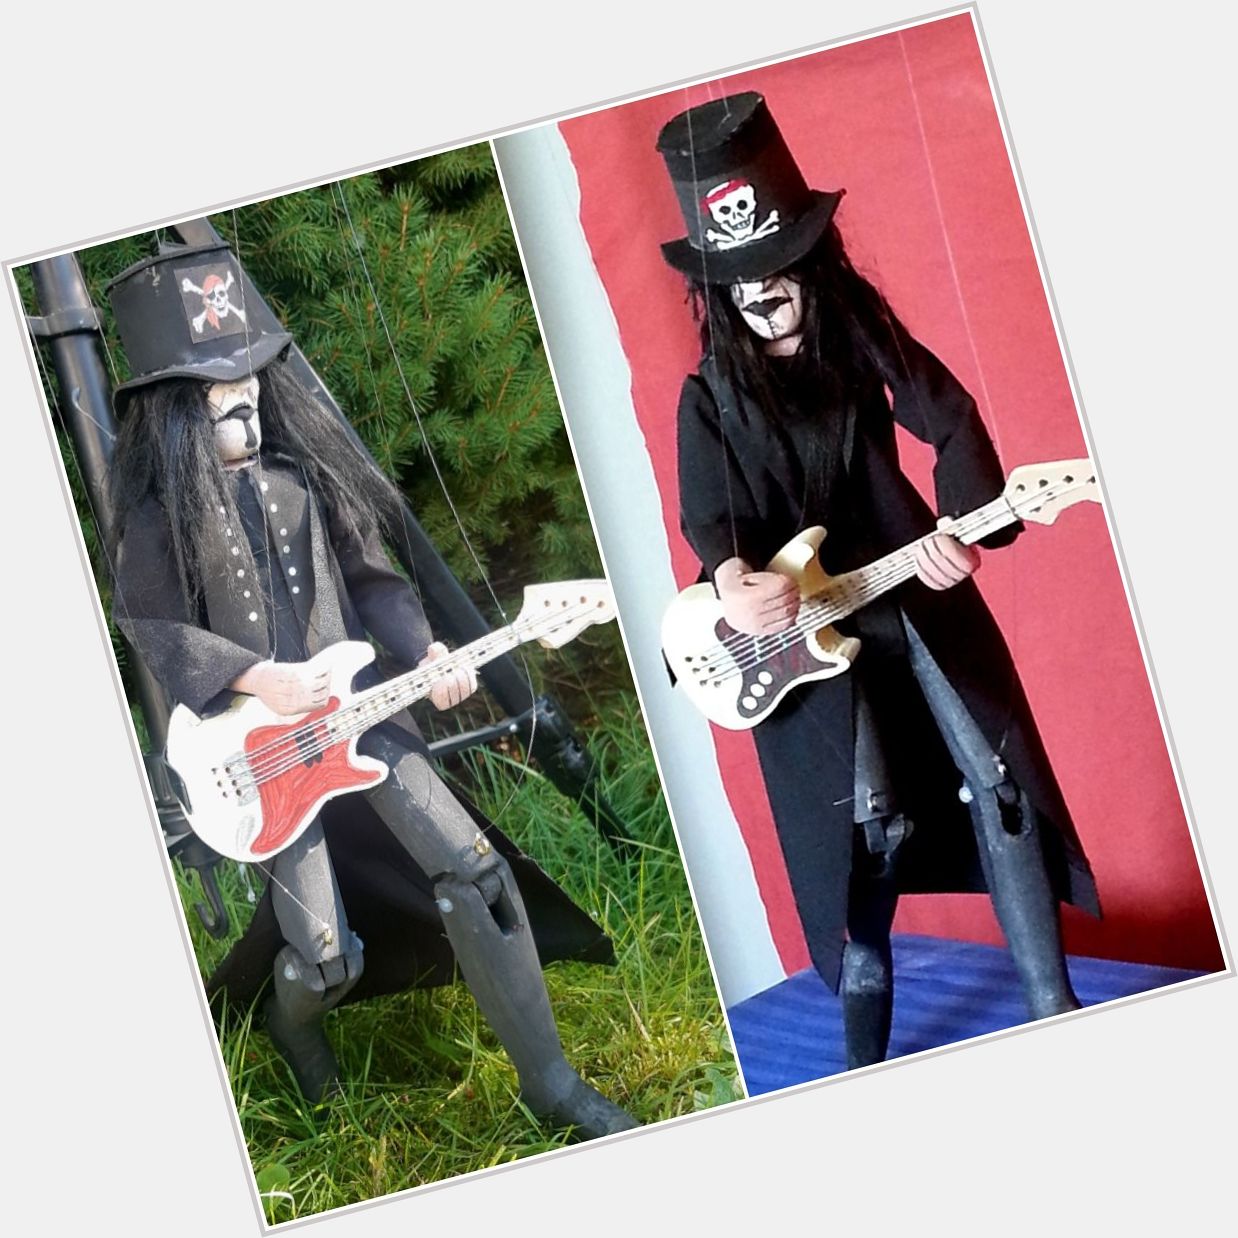 Happy Birthday to Mick Mars. These are two wooden marionette tributes I carved.  